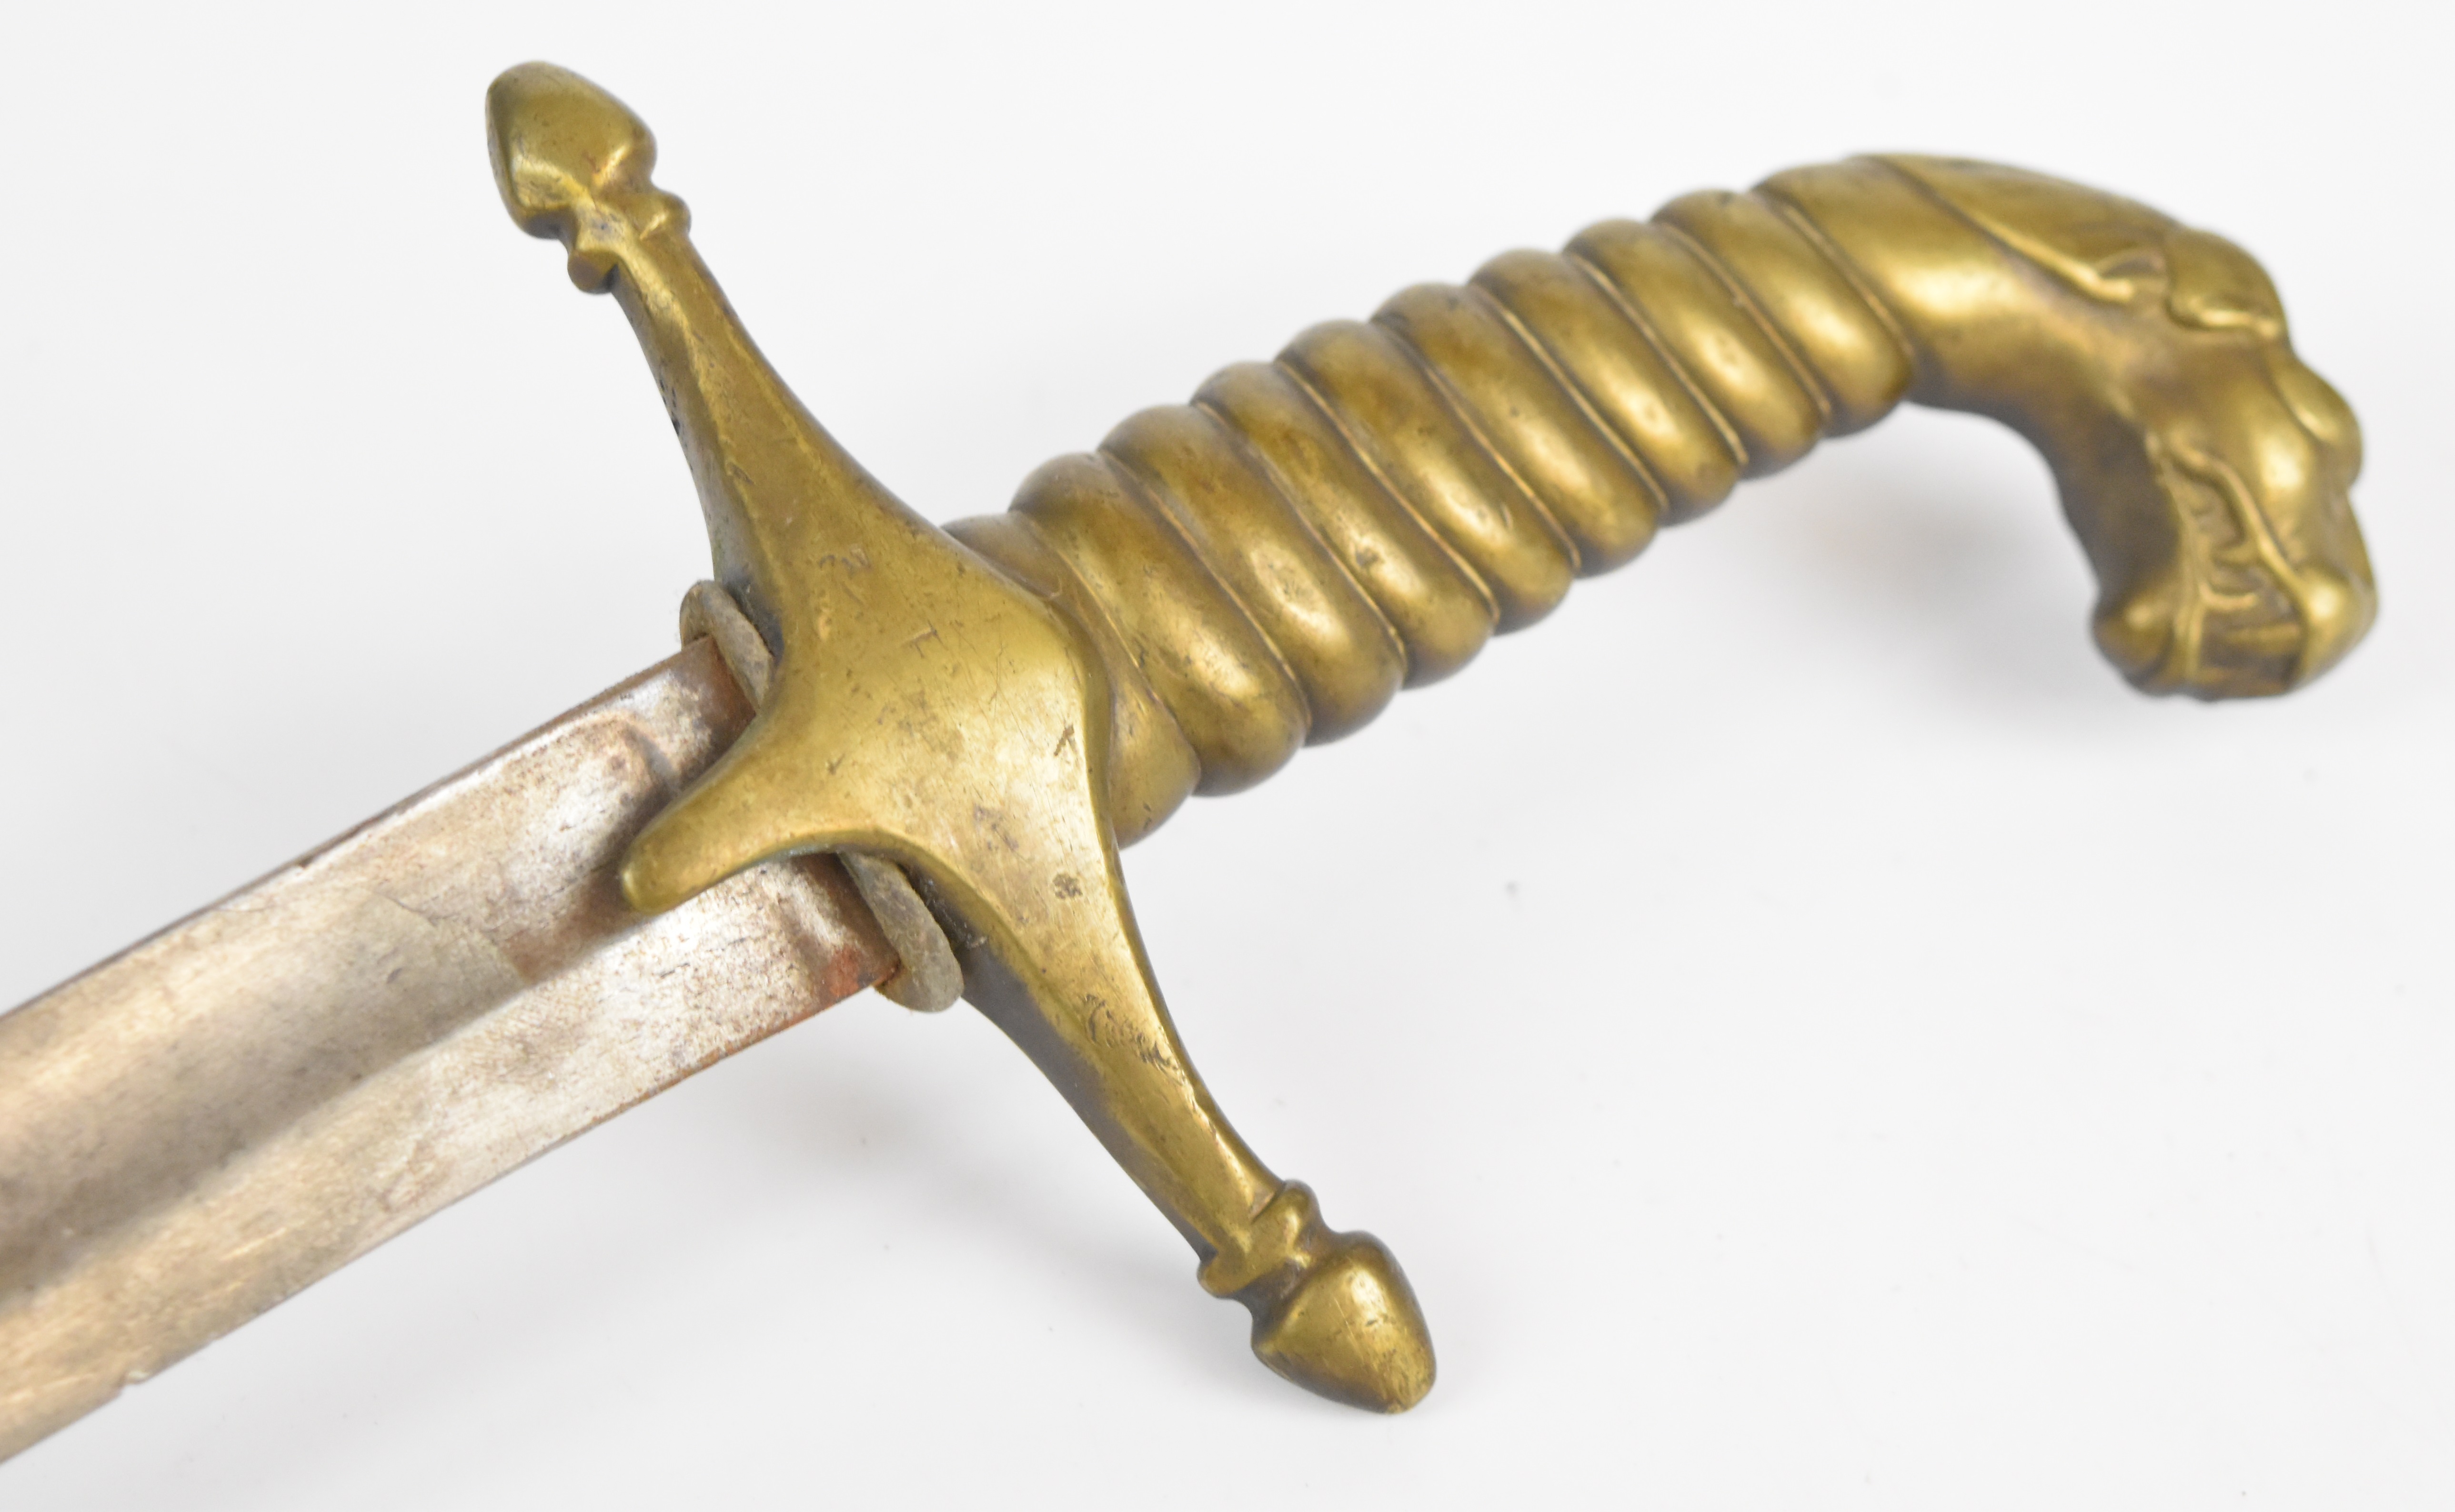 Naval type dirk with lion head pommel, brass grip and crosspiece, 50cm fullered single edged blade - Image 5 of 8